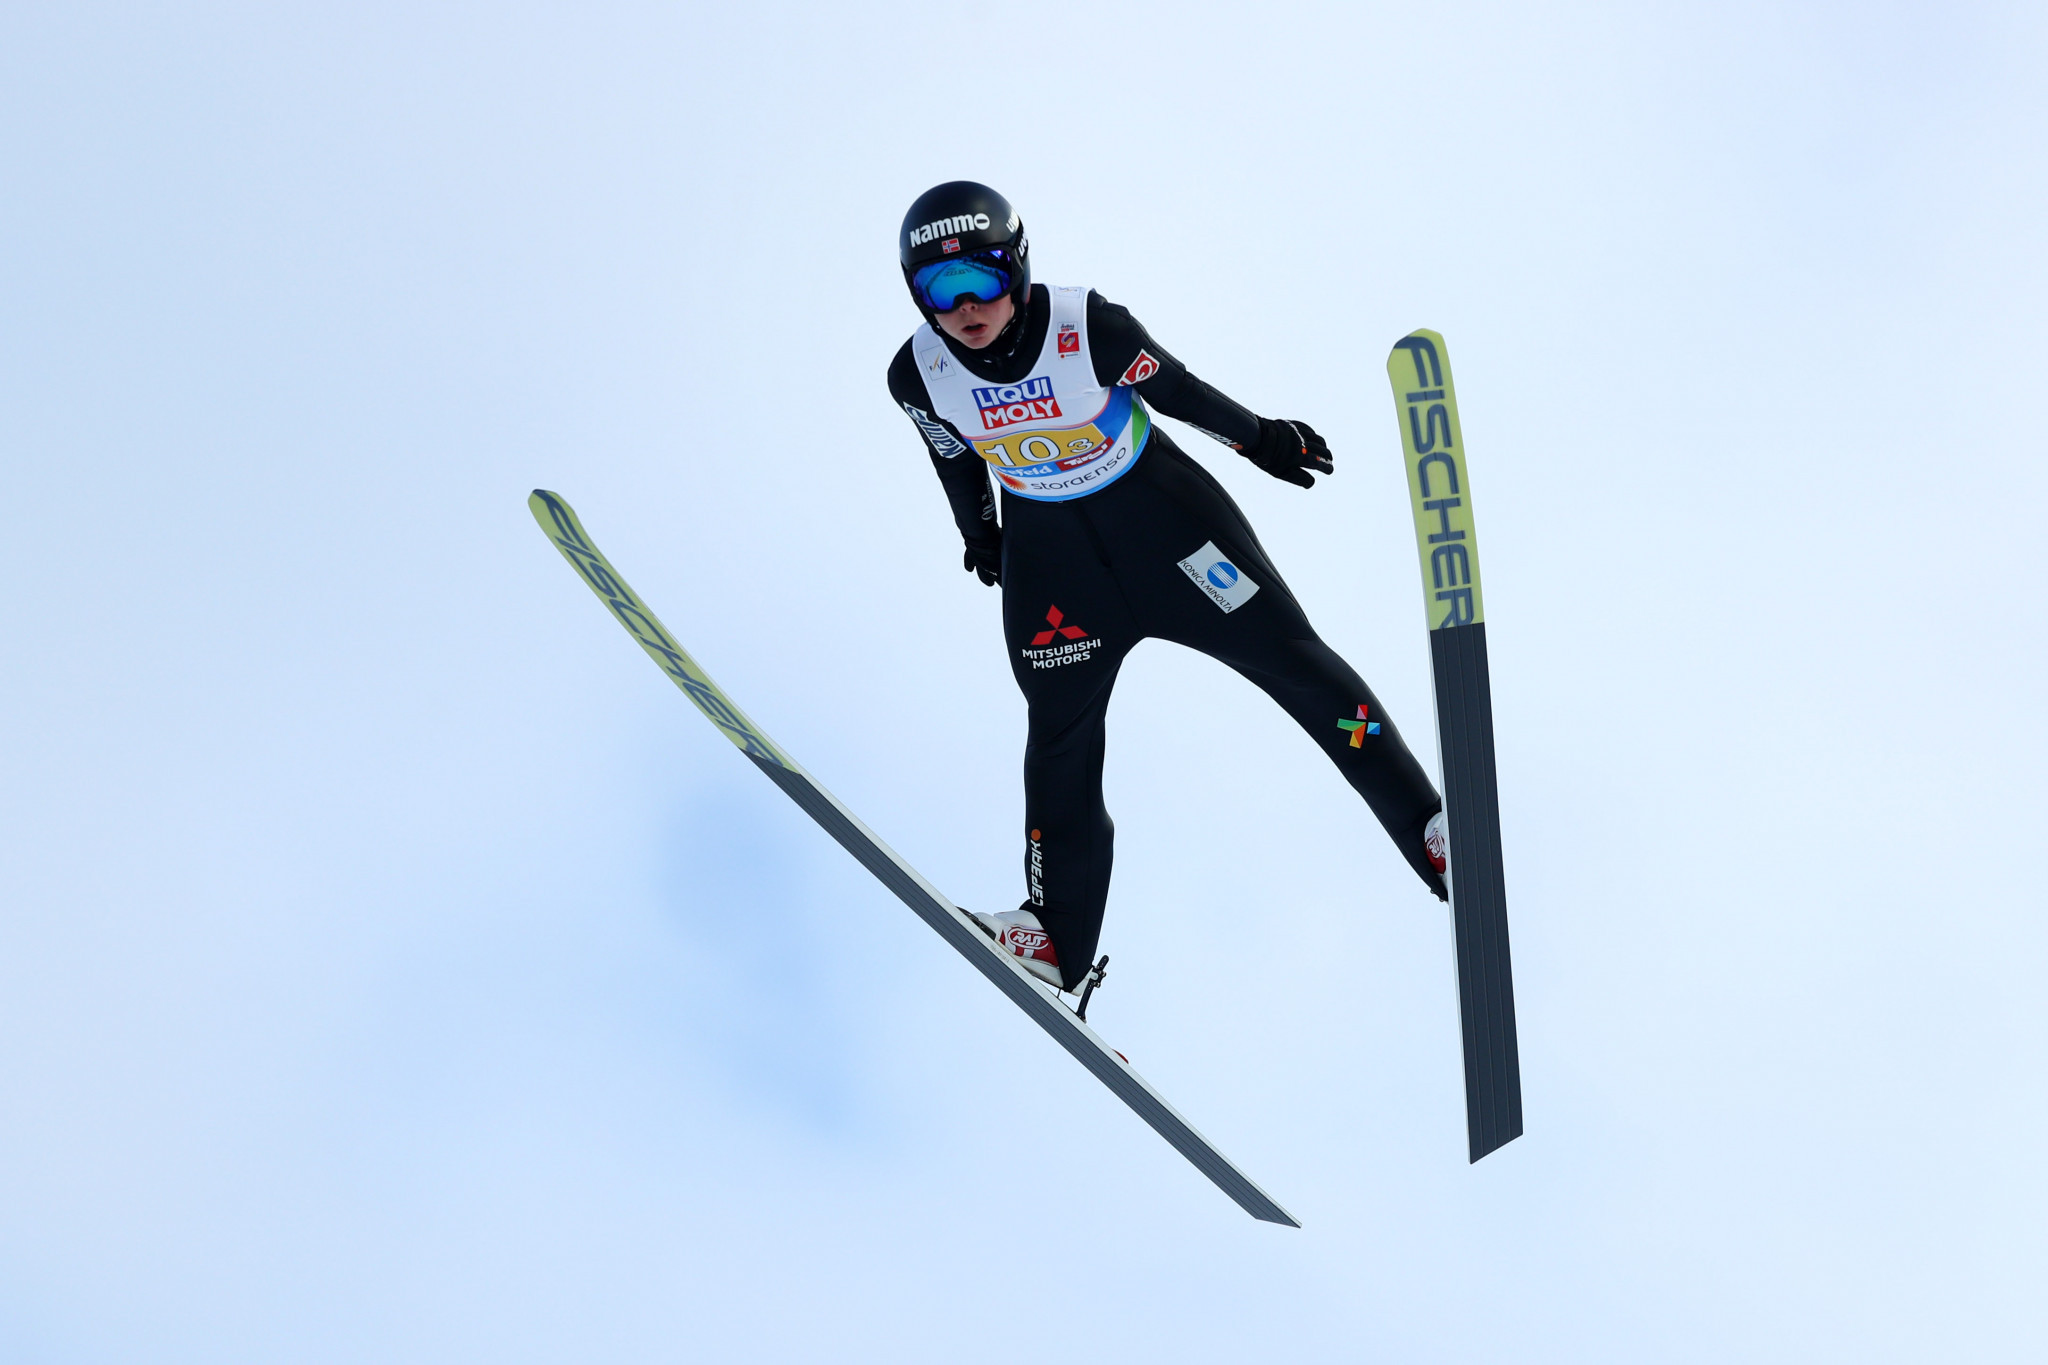 Norway's Lundby takes FIS Ski Jumping World Cup title with second place finish in Nizhny Tagil